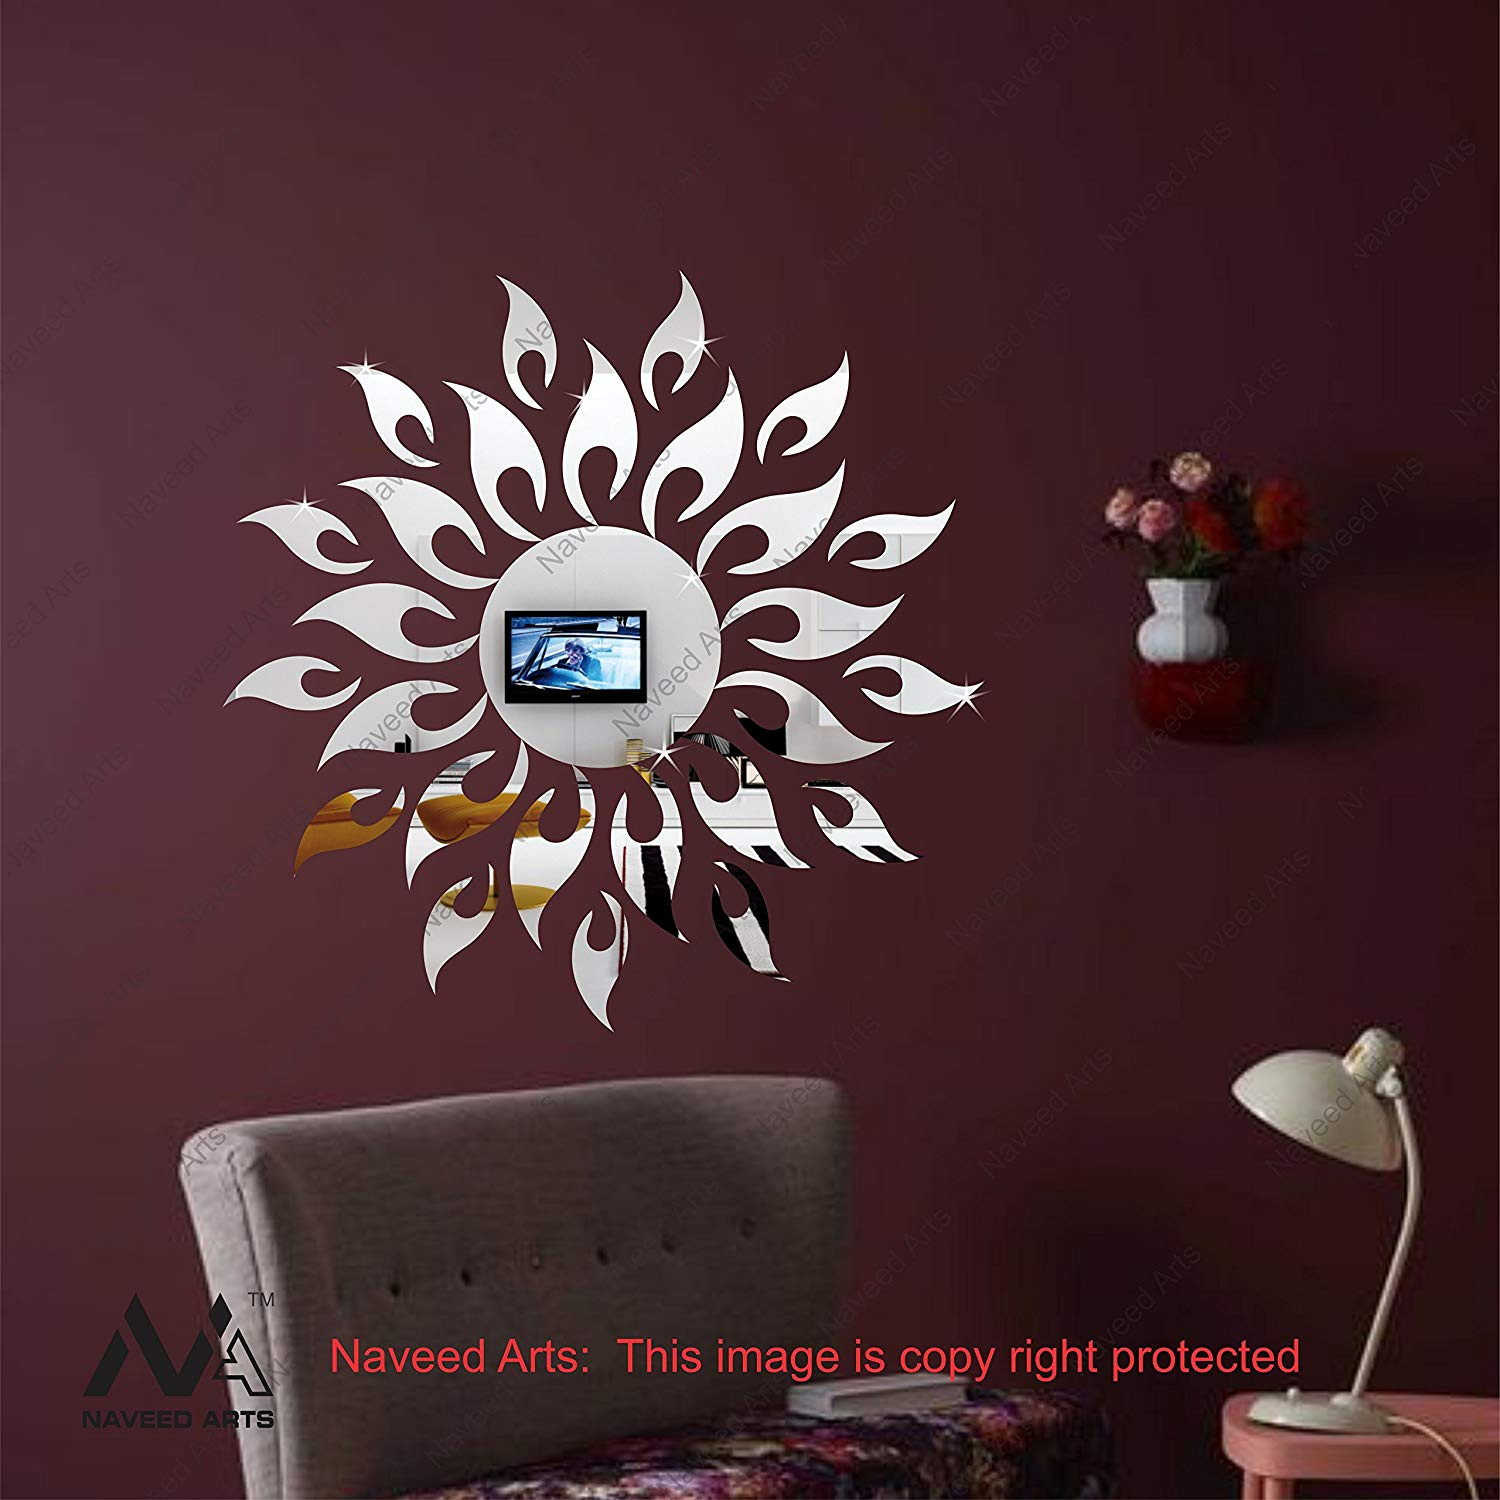 23 Nice Global Views Ovoid Vase 2024 free download global views ovoid vase of buy naveed arts 61 cm x 61 cm sun silver acrylic mirror decor within buy naveed arts 61 cm x 61 cm sun silver acrylic mirror decor wall sticker jb099s factory outl